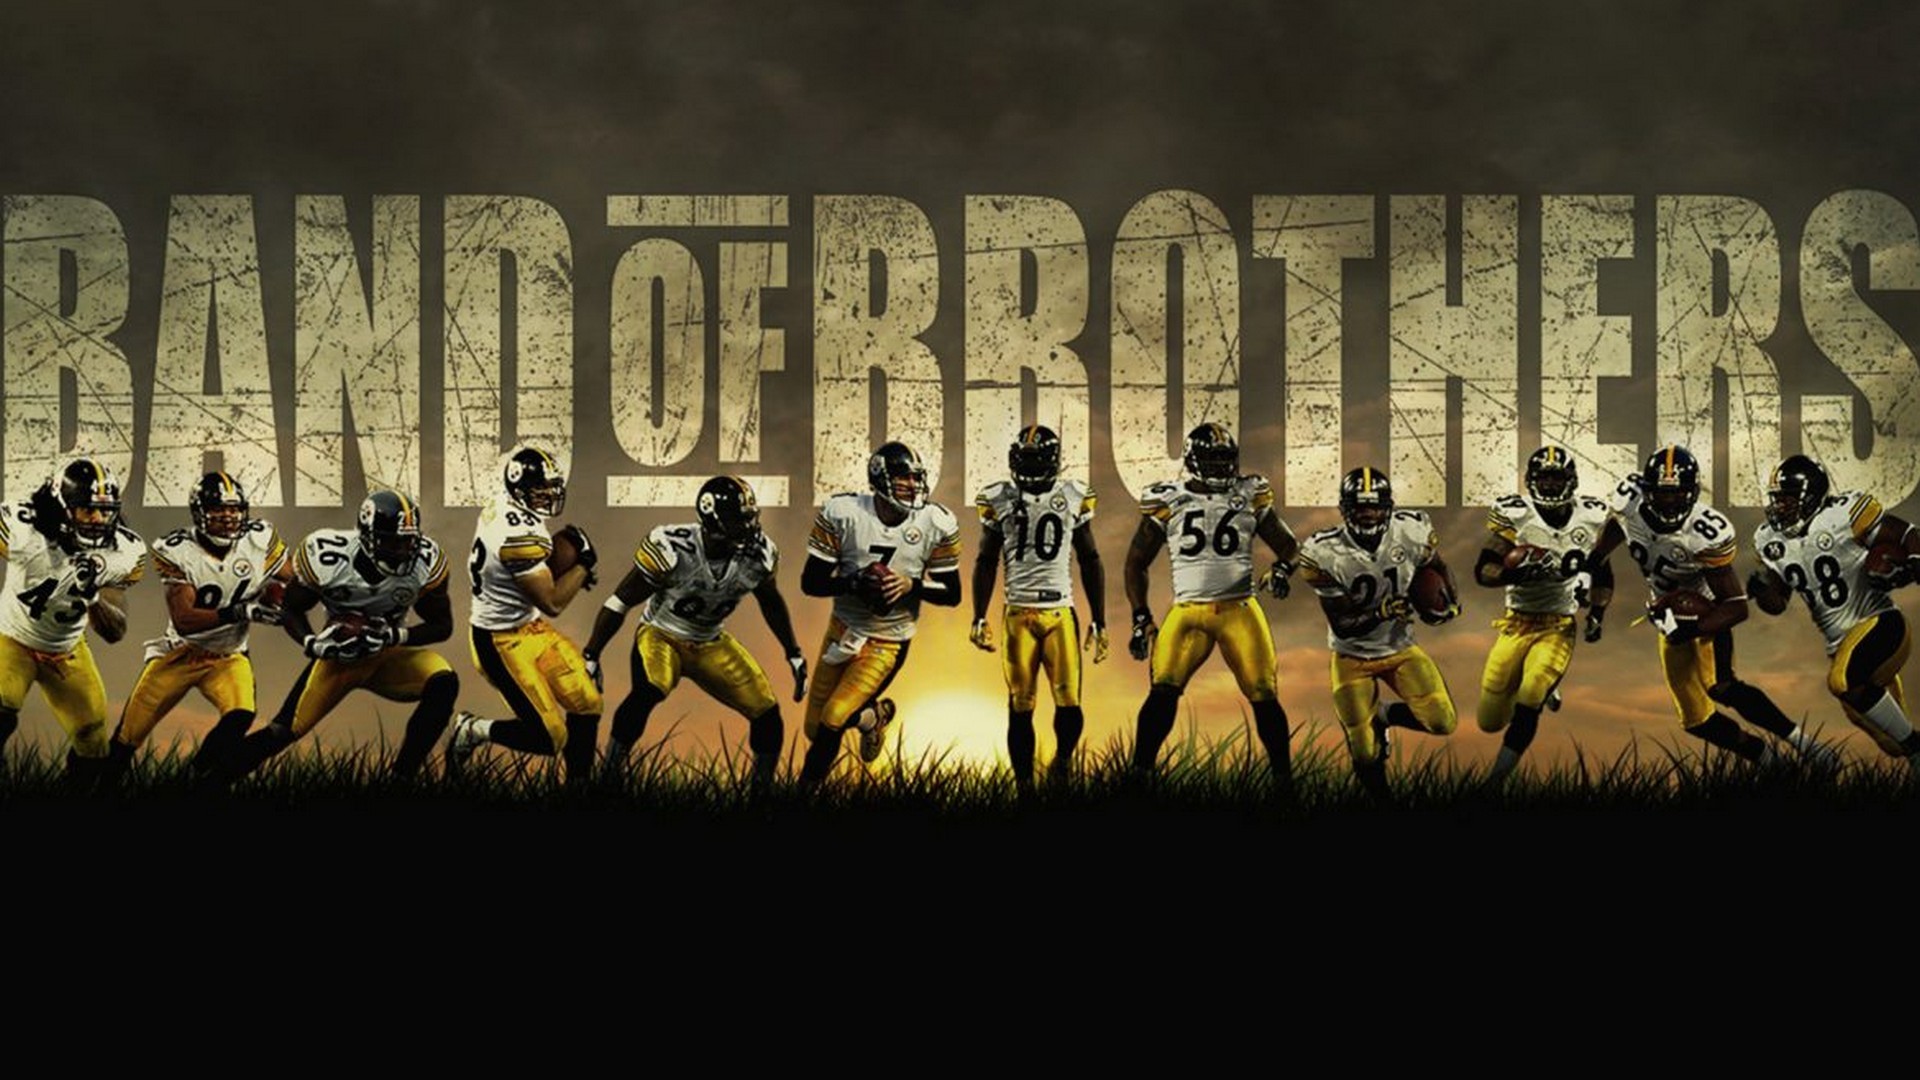 1920x1080 Pittsburgh Steelers Football For PC Wallpaper with resolution   pixel. You can make this wallpaper